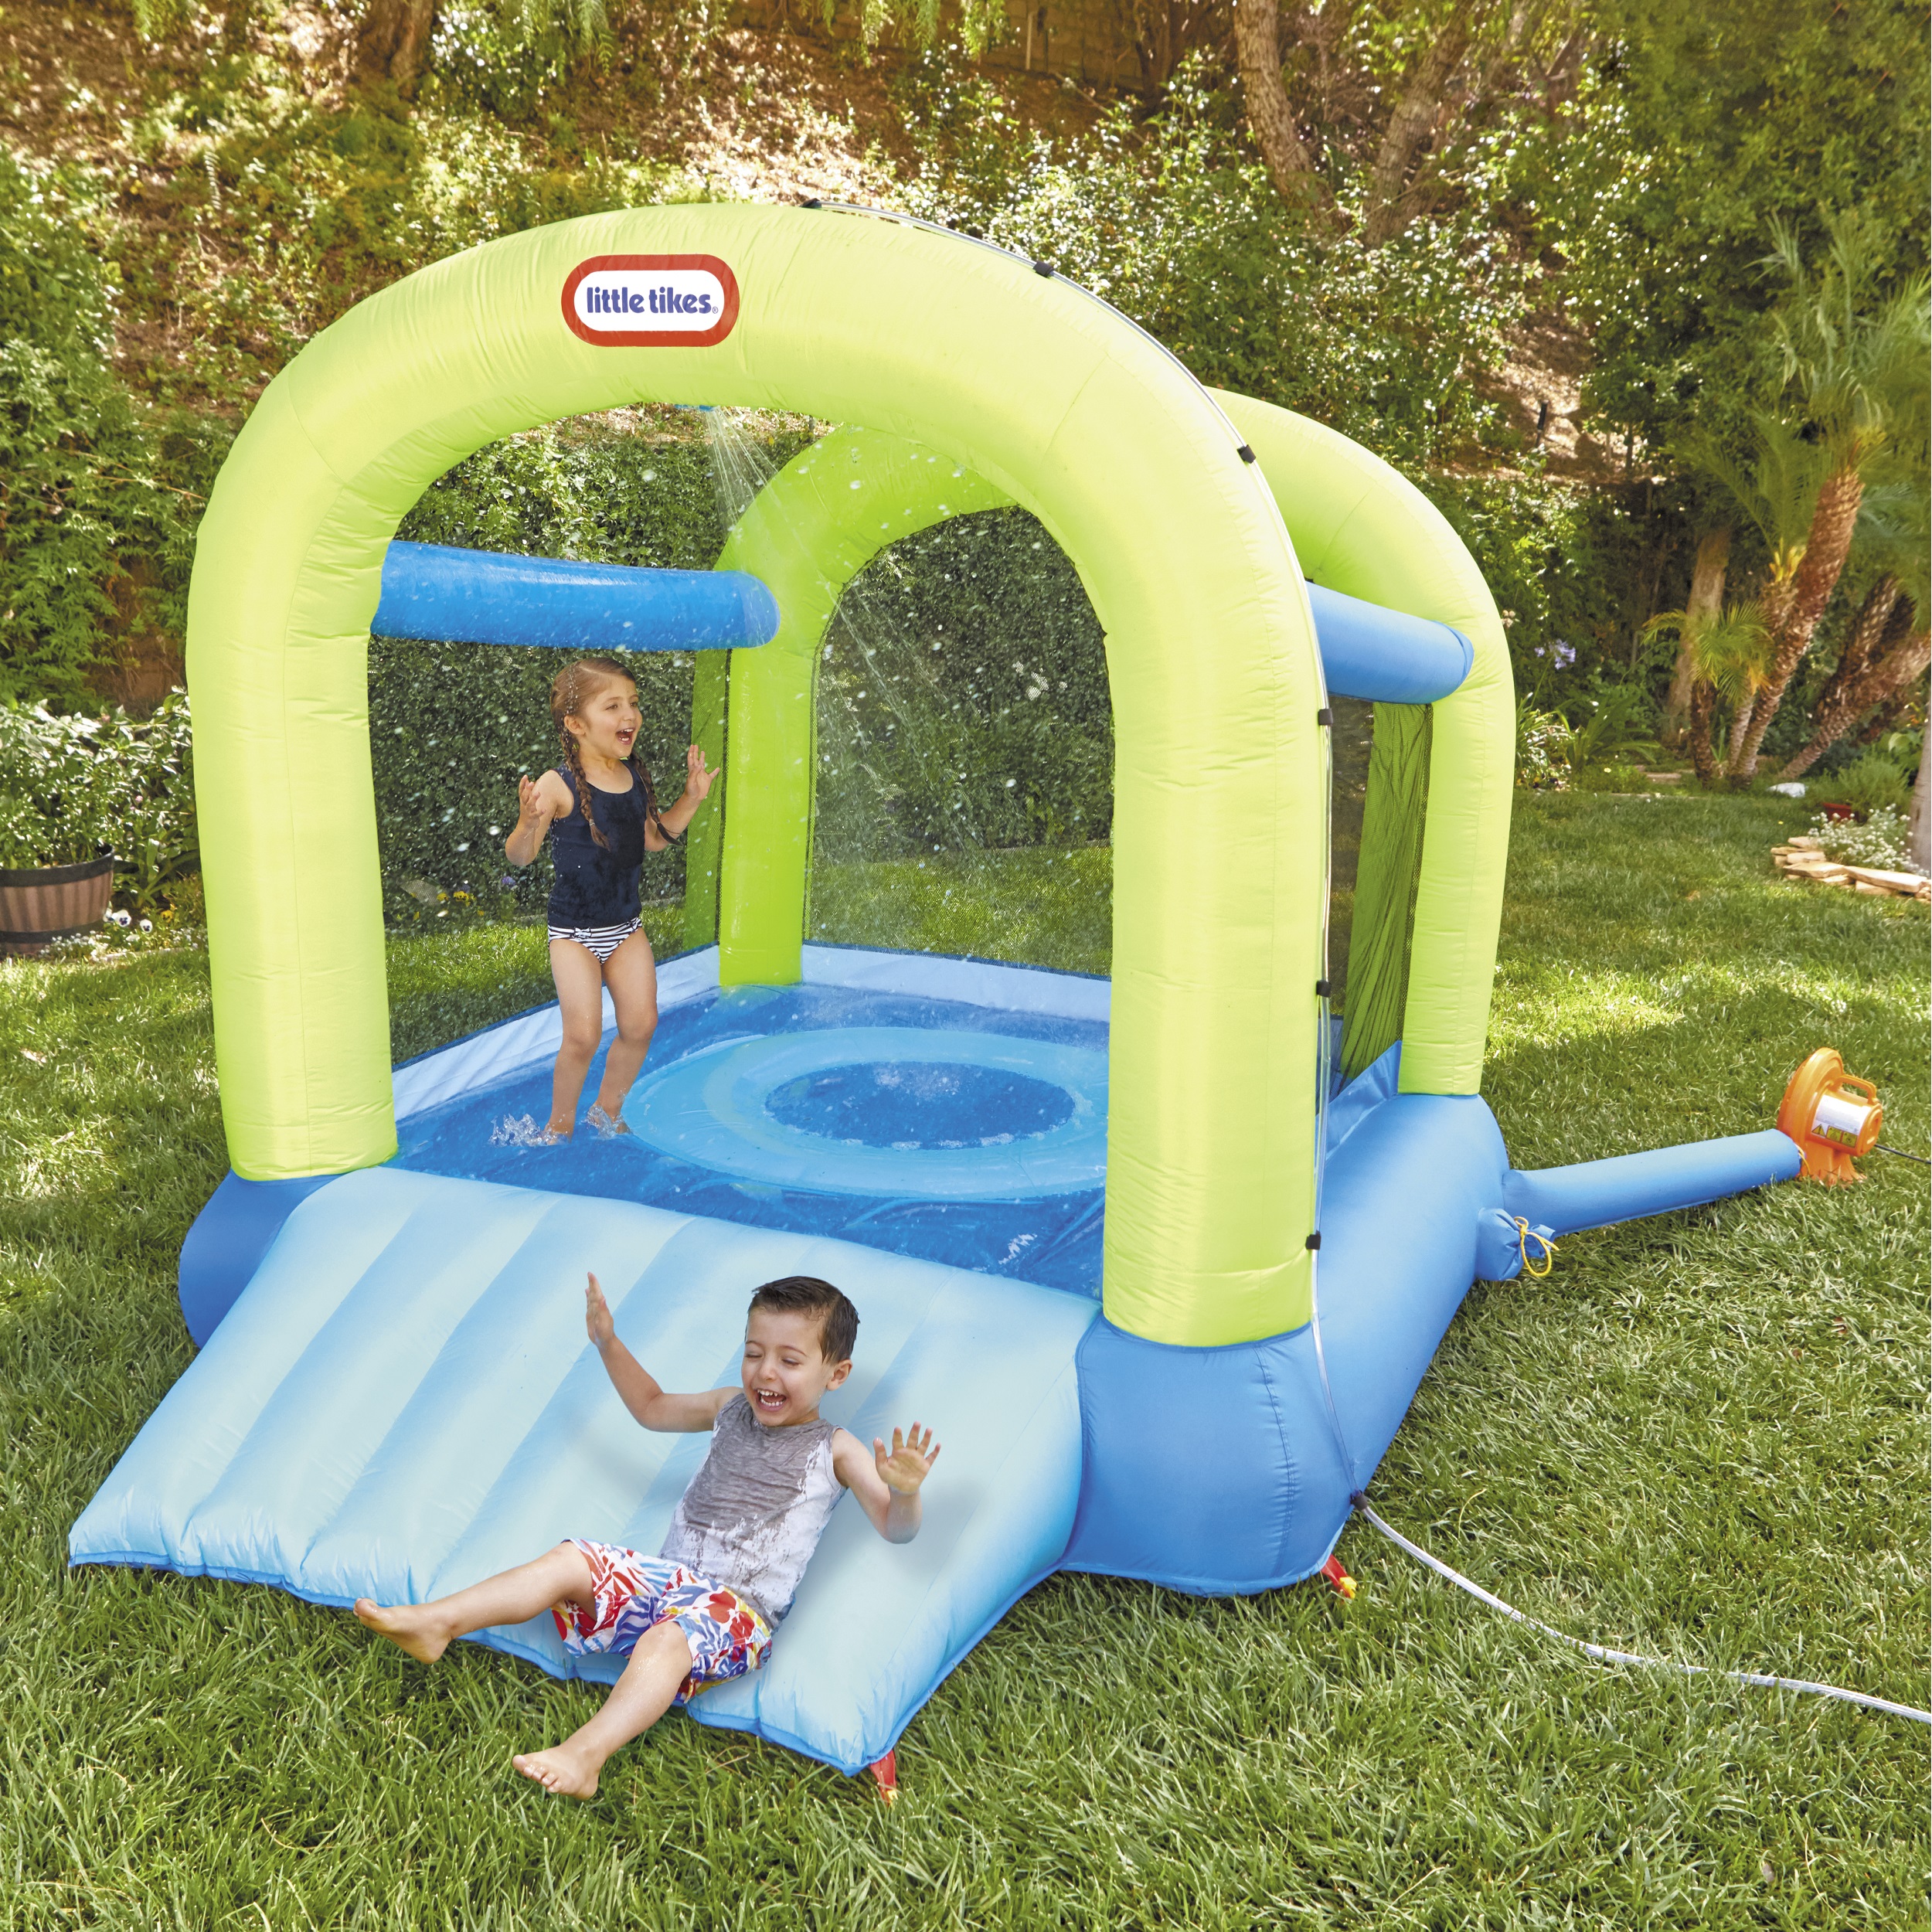 Little Tikes Splash n' Spray Outdoor Indoor 2-in-1 Inflatable Bounce House with Slide, Water Spray and Blower, Fits 2 Kids, Backyard Toy For Boys Girls Ages 3-8 Years - image 5 of 7